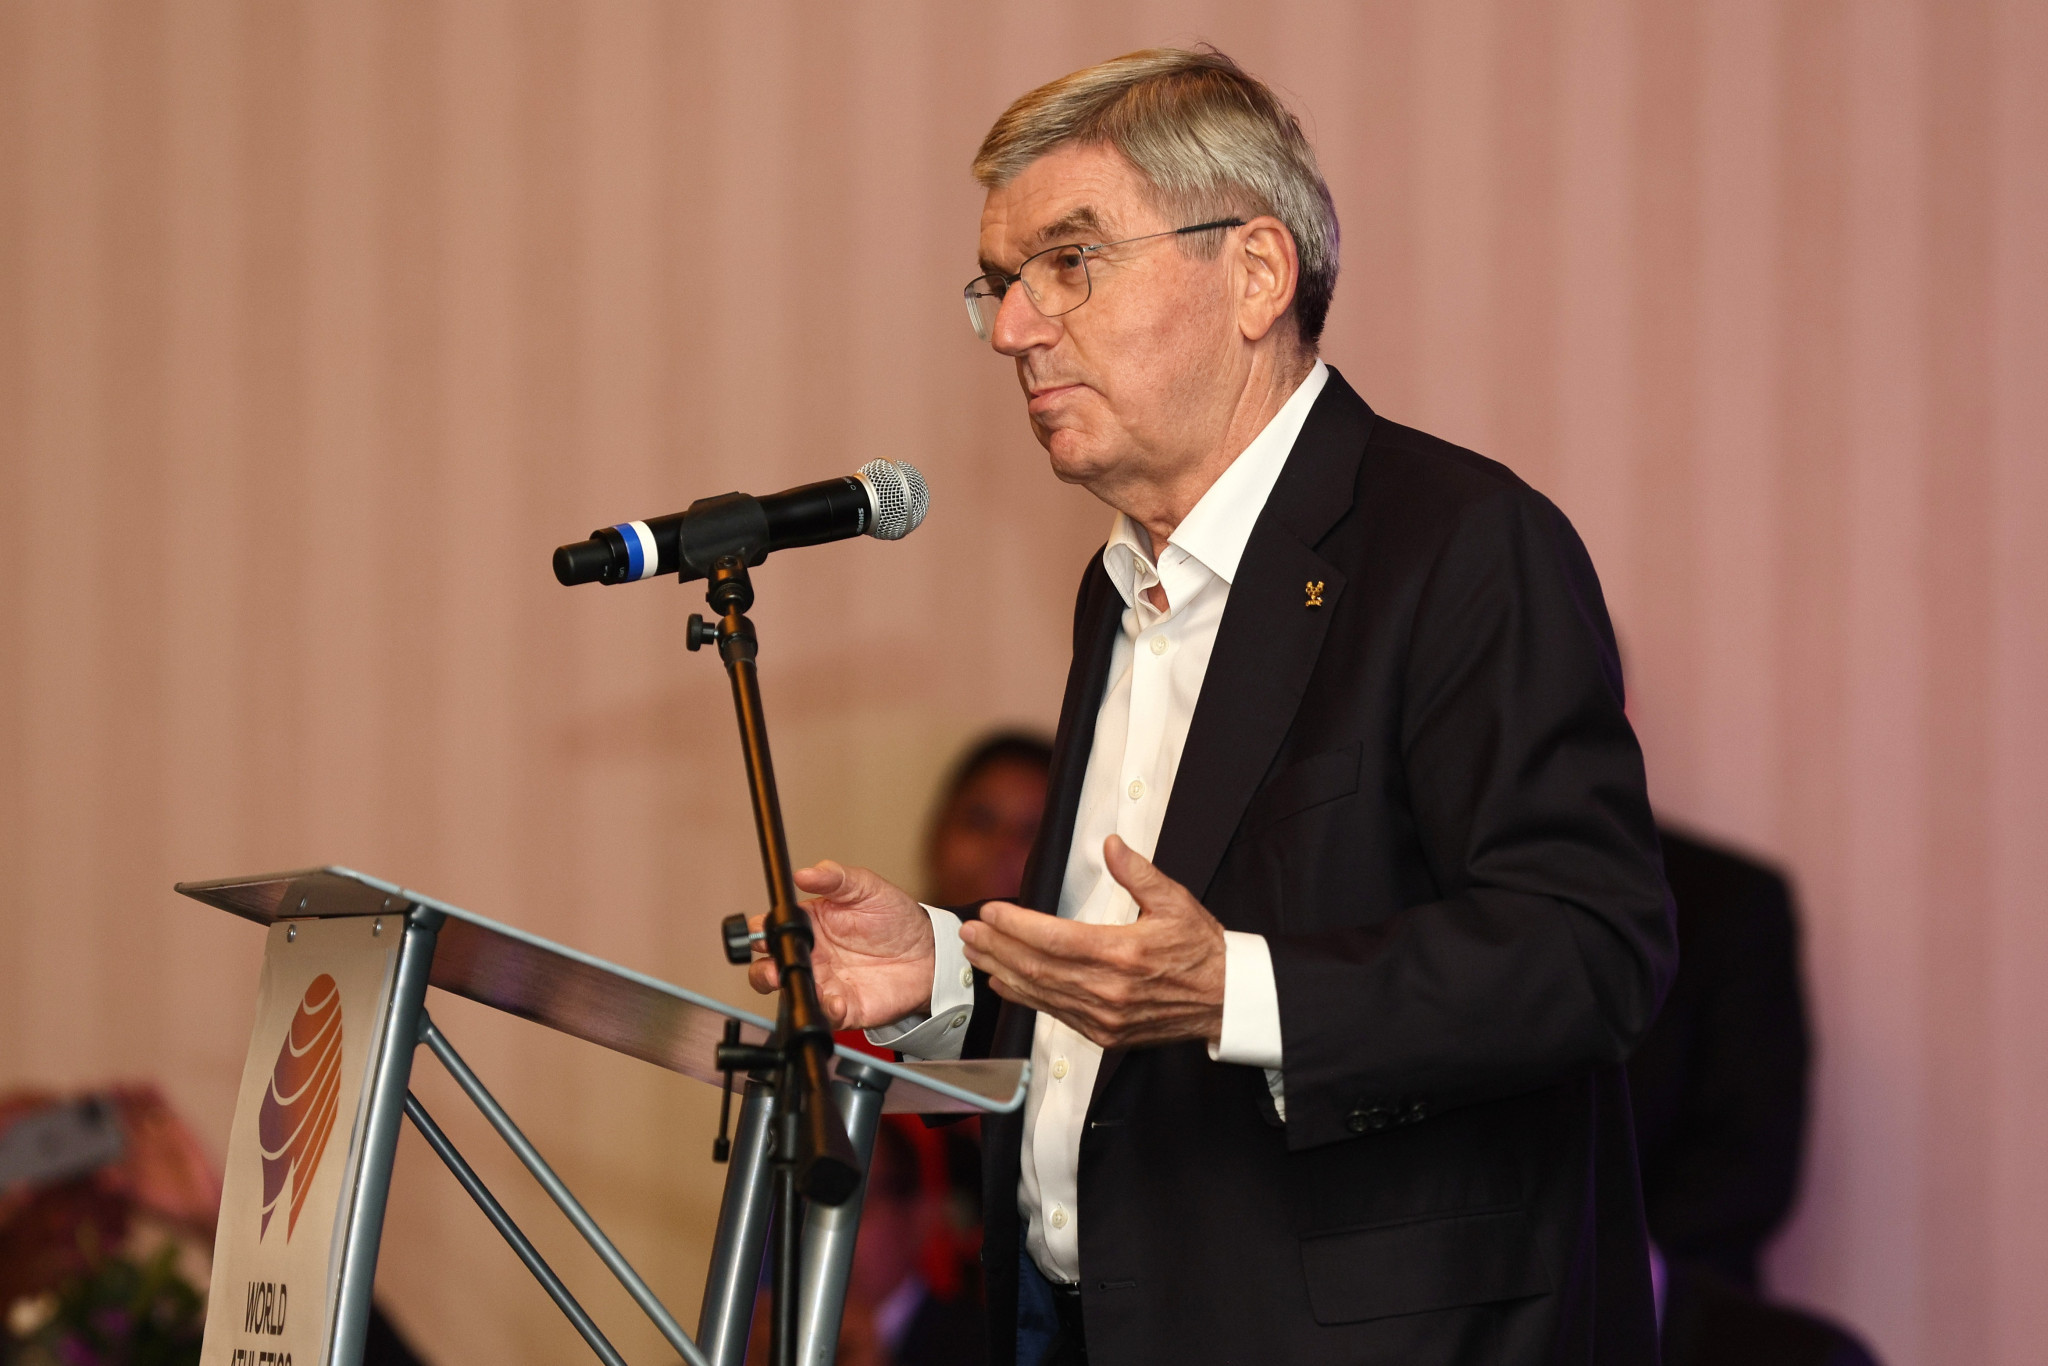 IOC President Thomas Bach has sought to frame the recommendations as a 